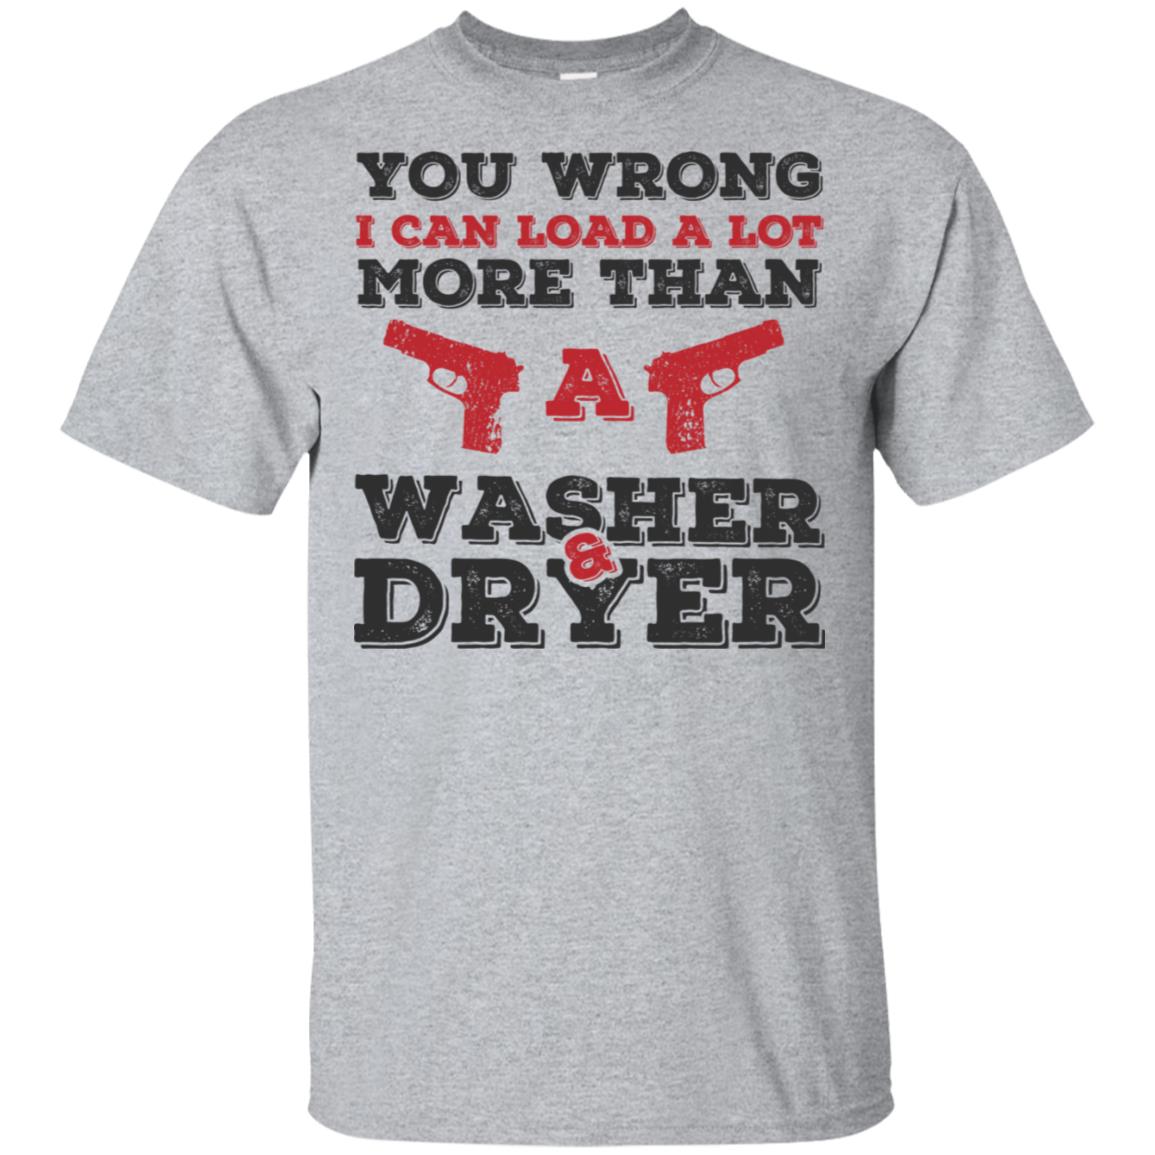 I Can Load More Than A Washer Dryer T-Shirt - AMZPrimeShirt